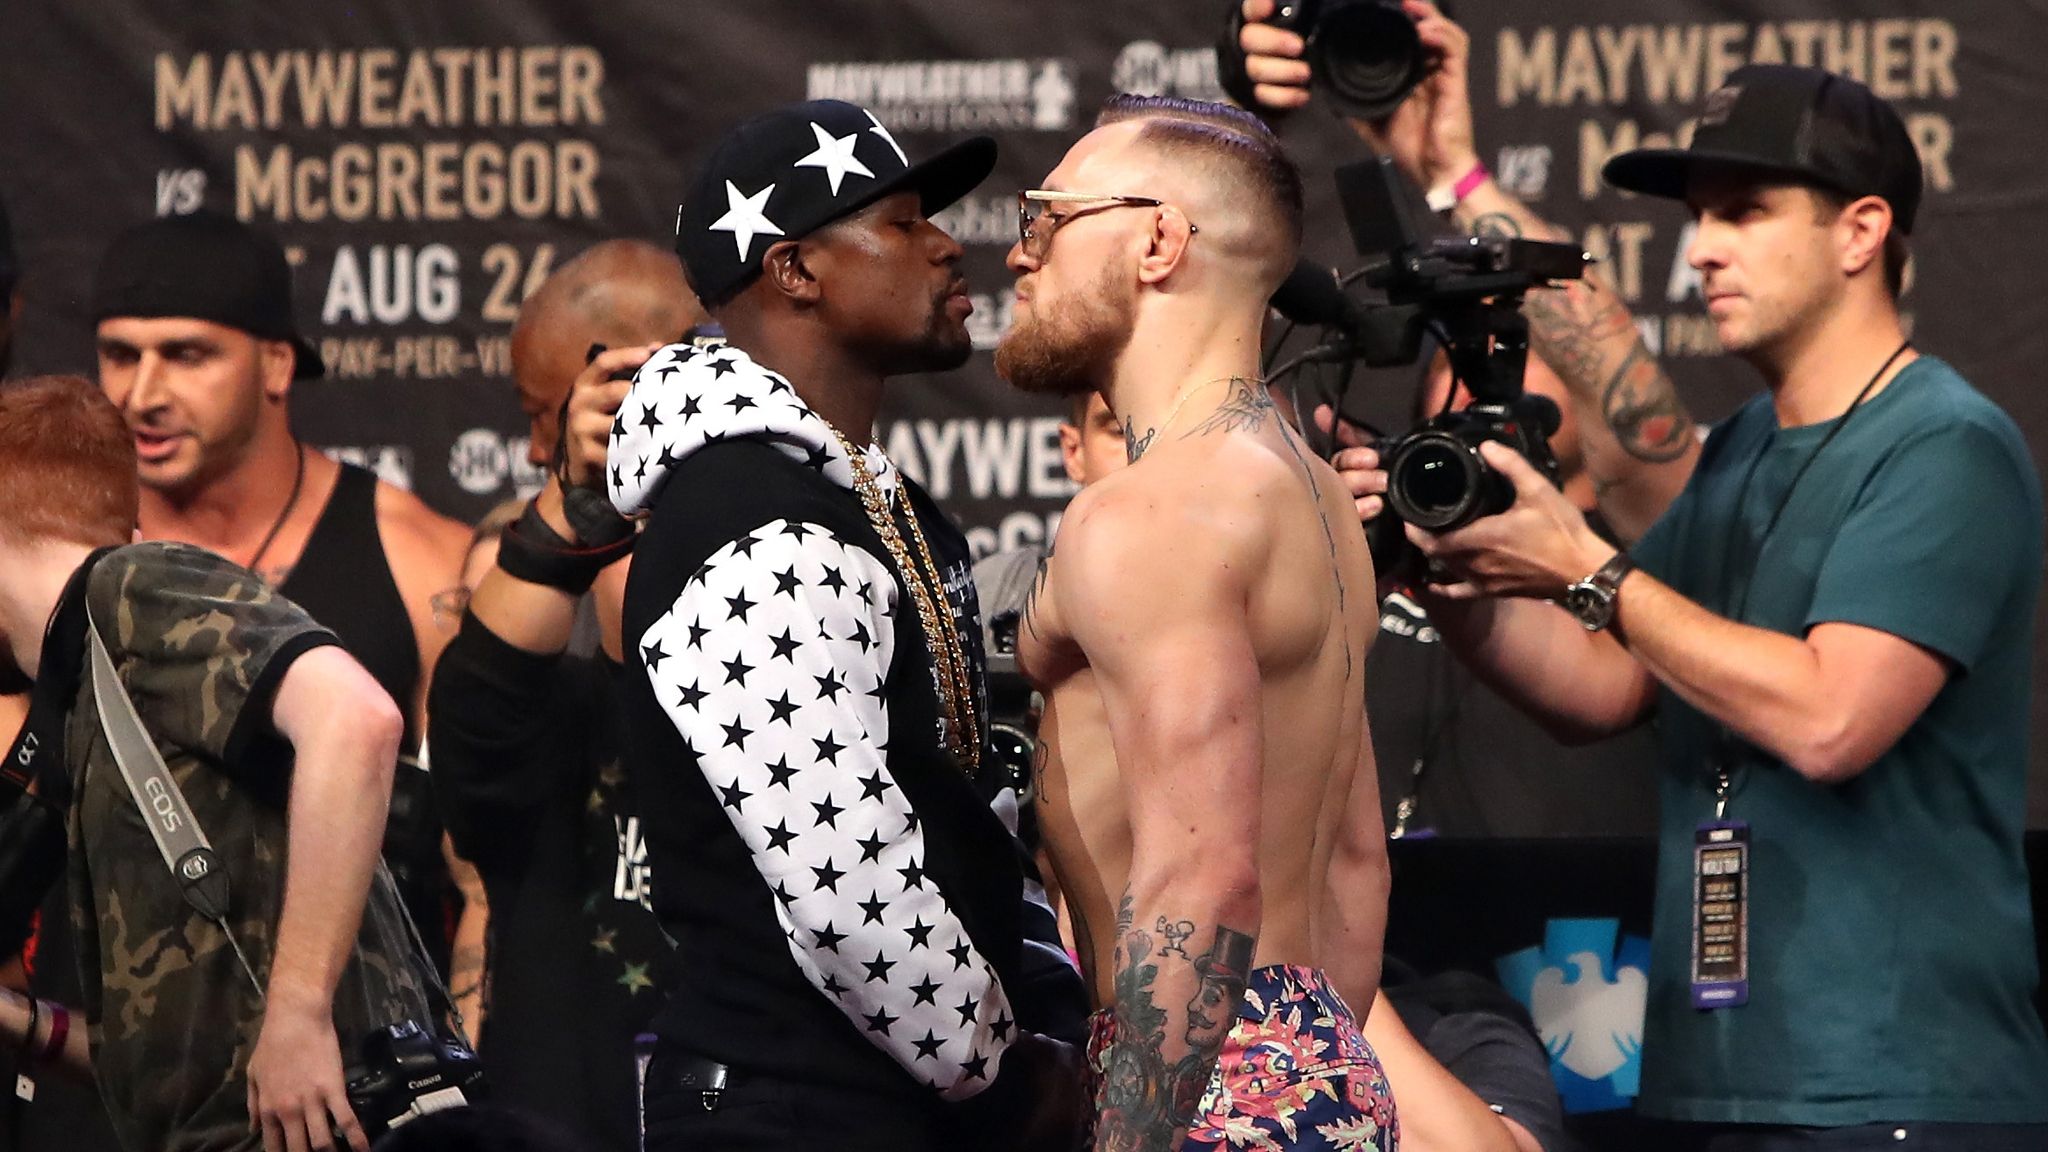 Mayweather vs McGregor Dave Coldwell says Floyd Mayweather is failing to match Conor McGregor Boxing News Sky Sports